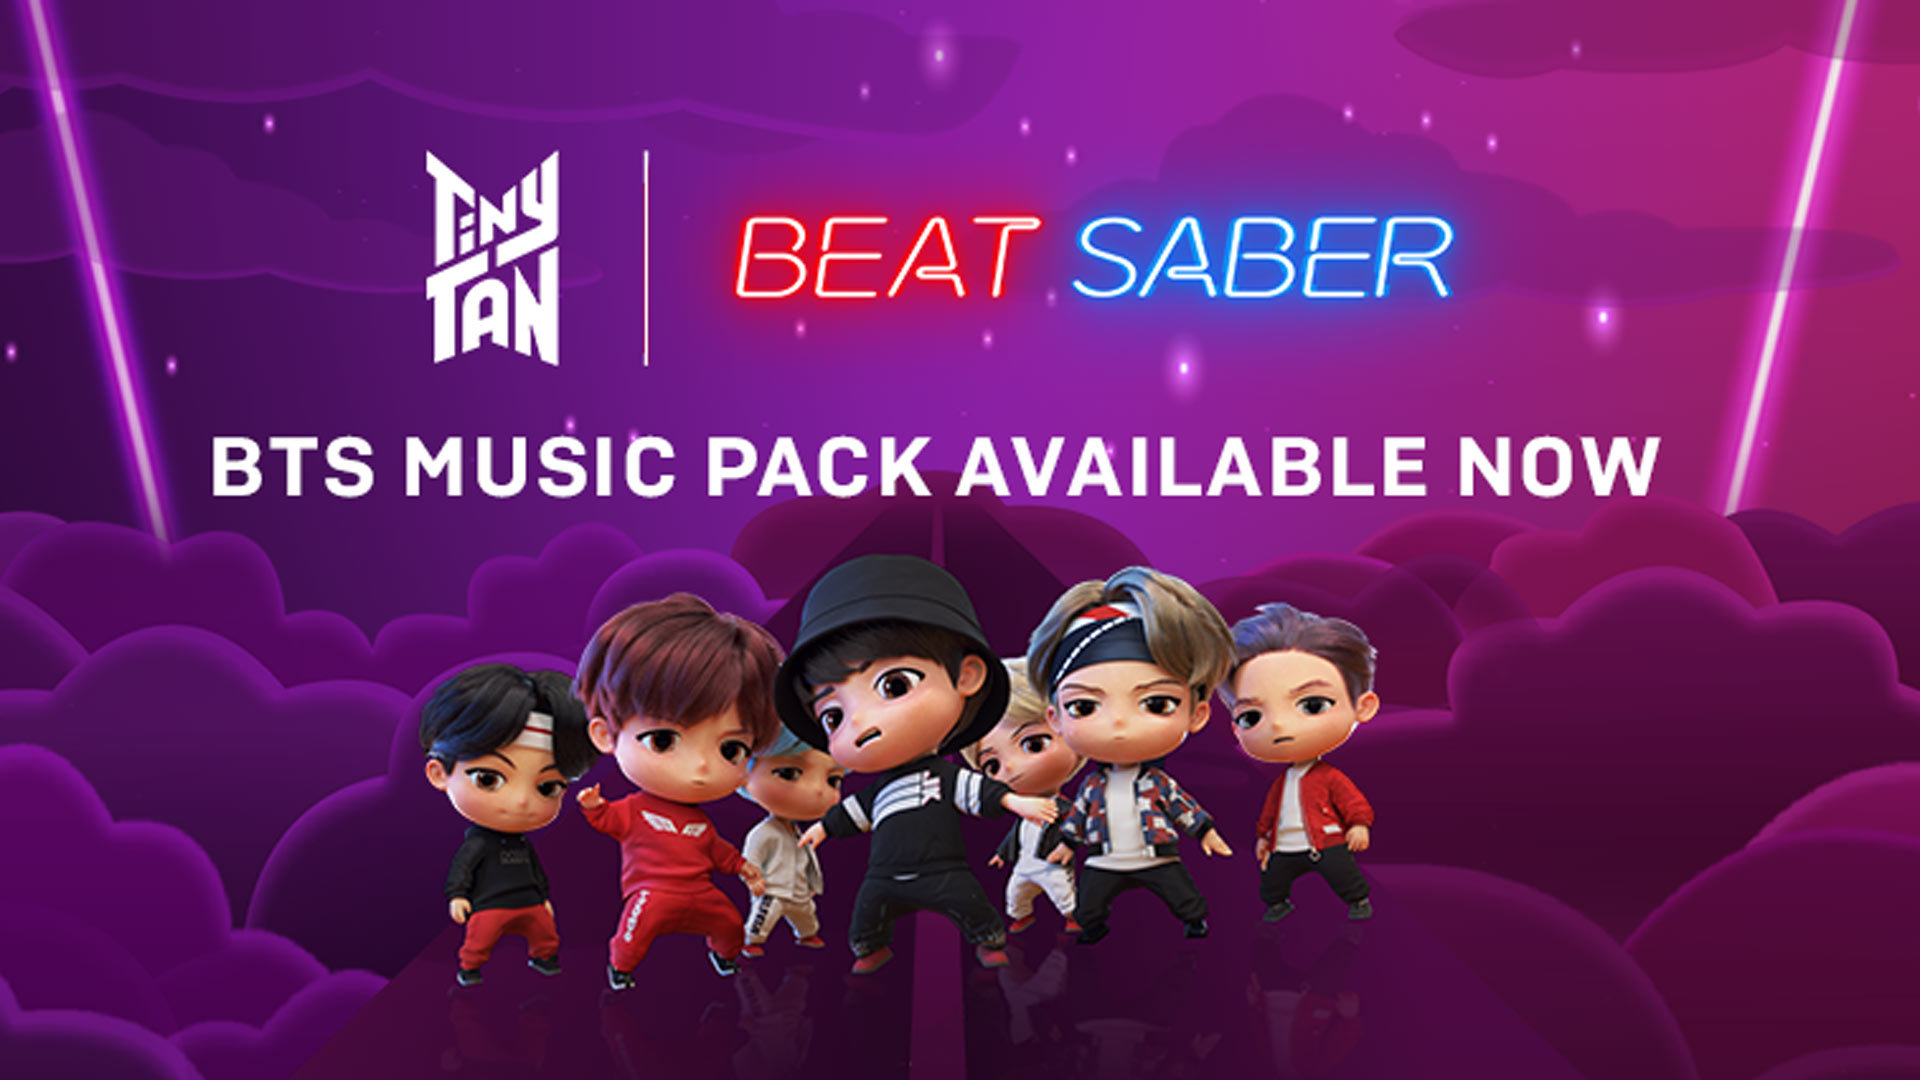 BTS Comes to 'Beat Saber' in New Music Pack DLC, Trailer Here – Road